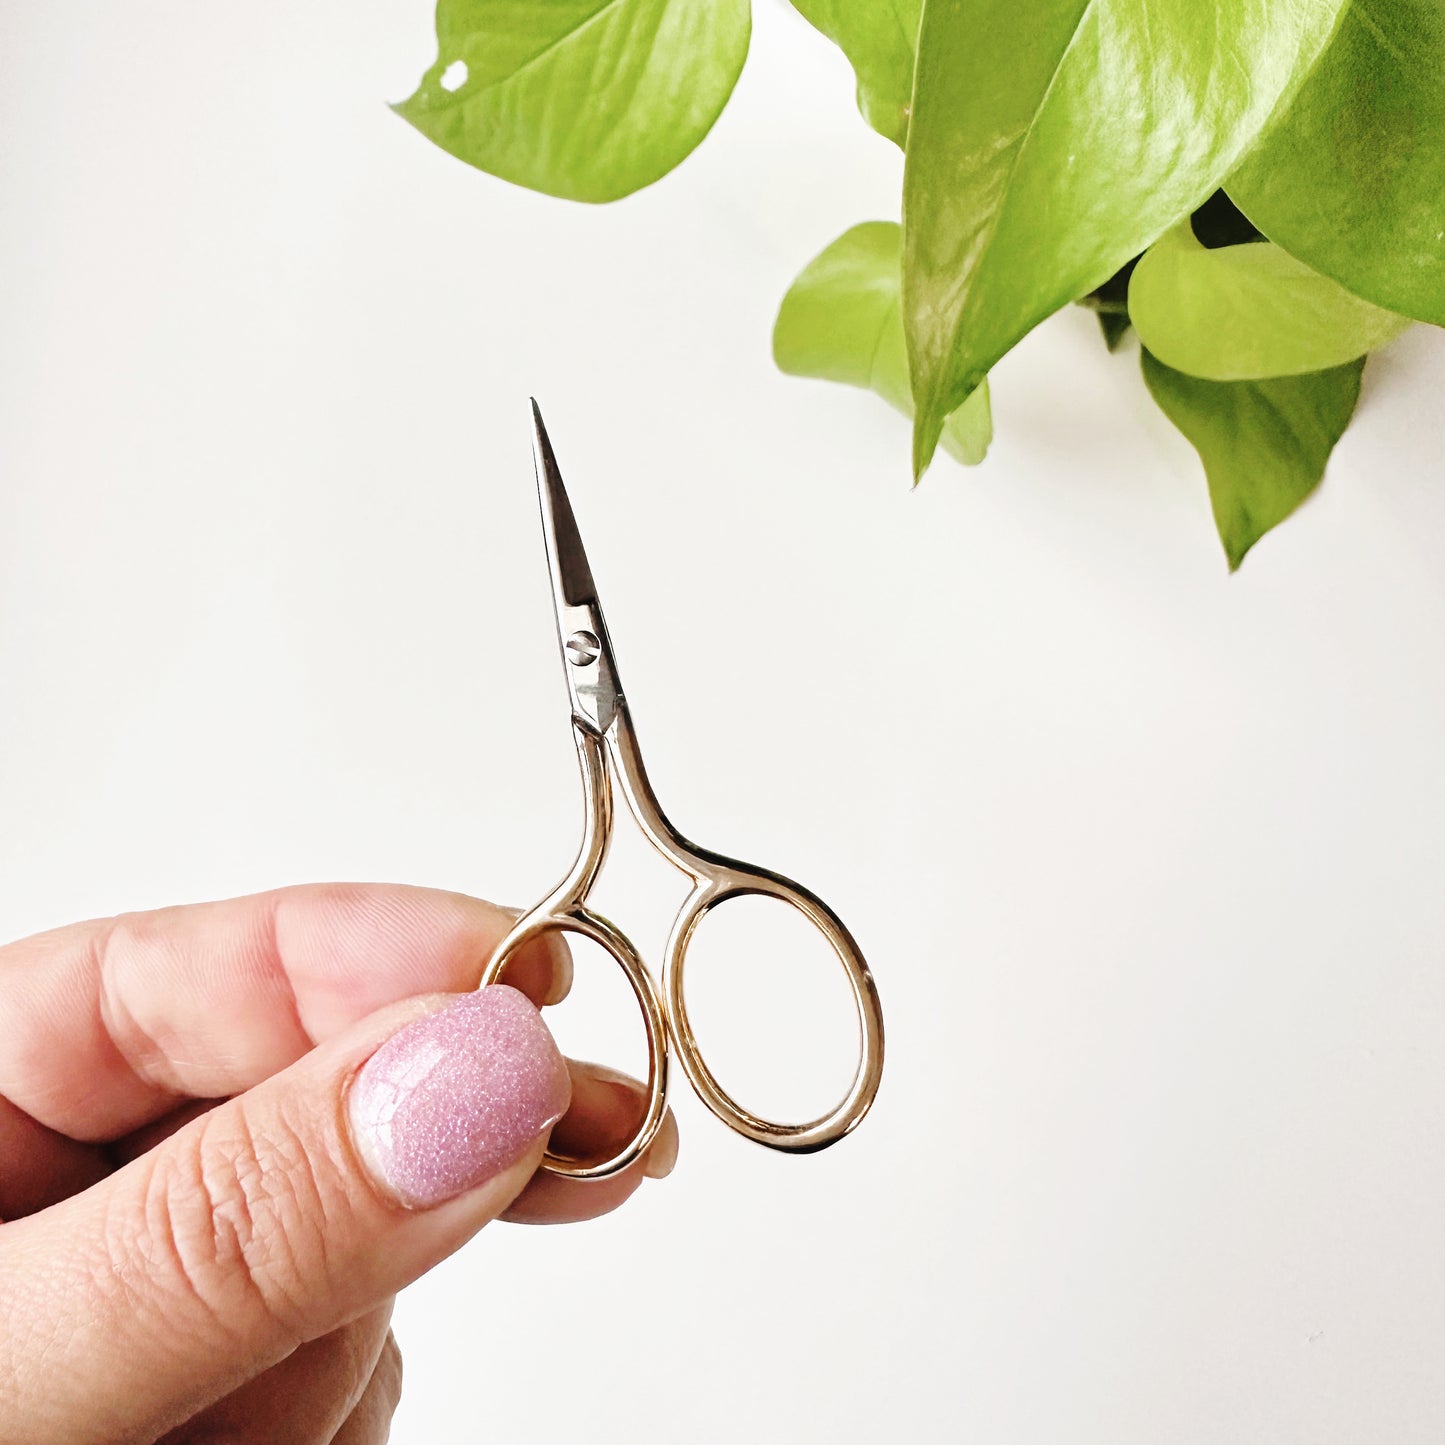 Short Stuff Embroidery Scissors by Tooltron